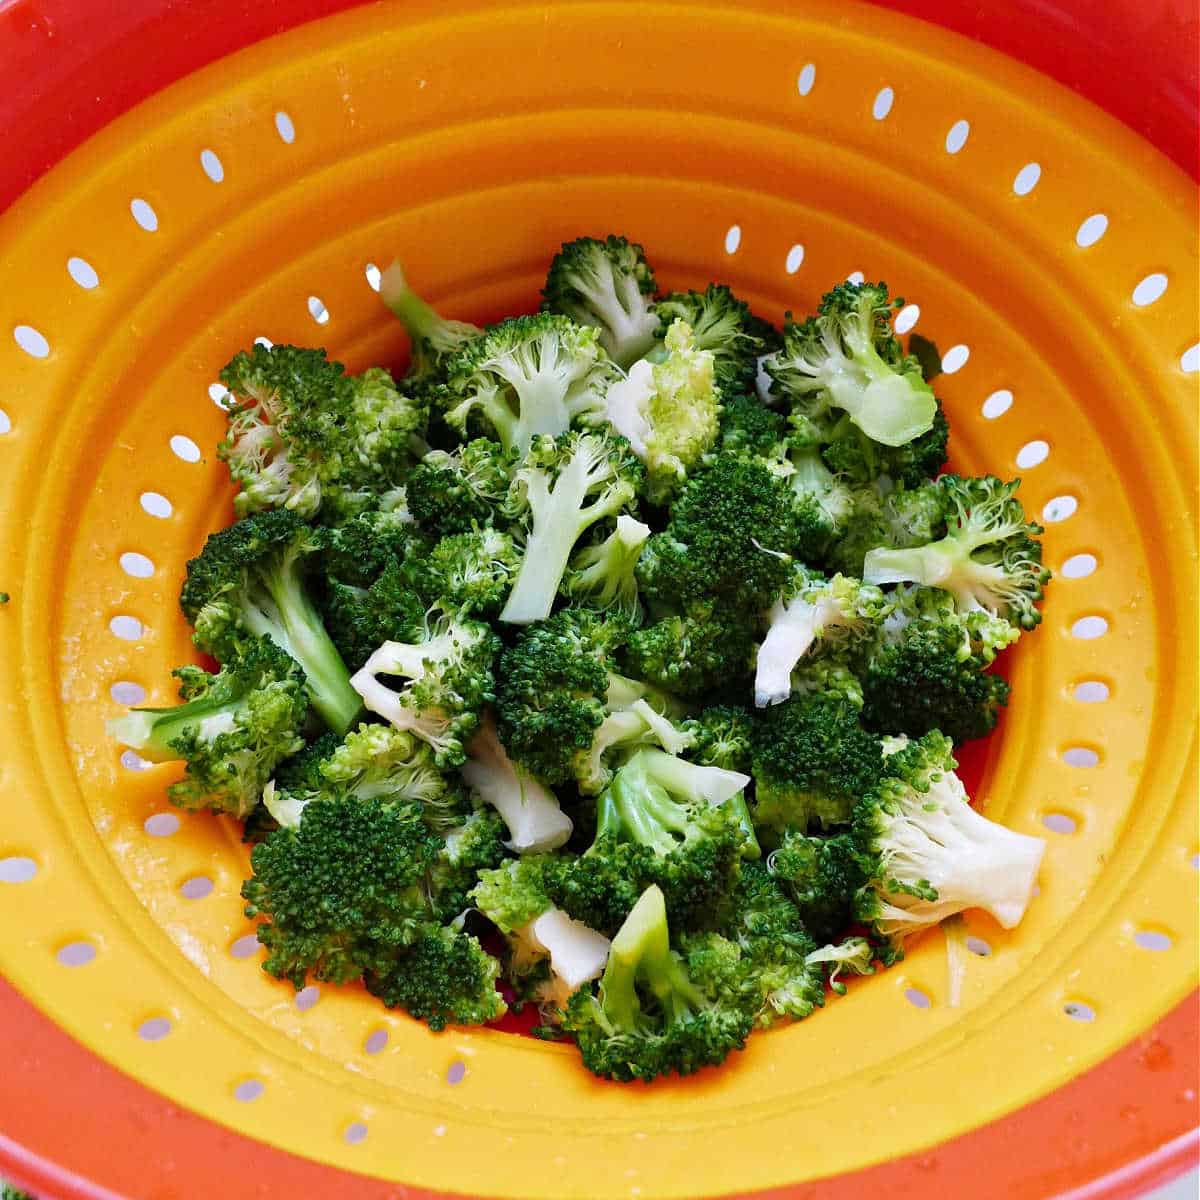 boiled broccoli drained in a colander